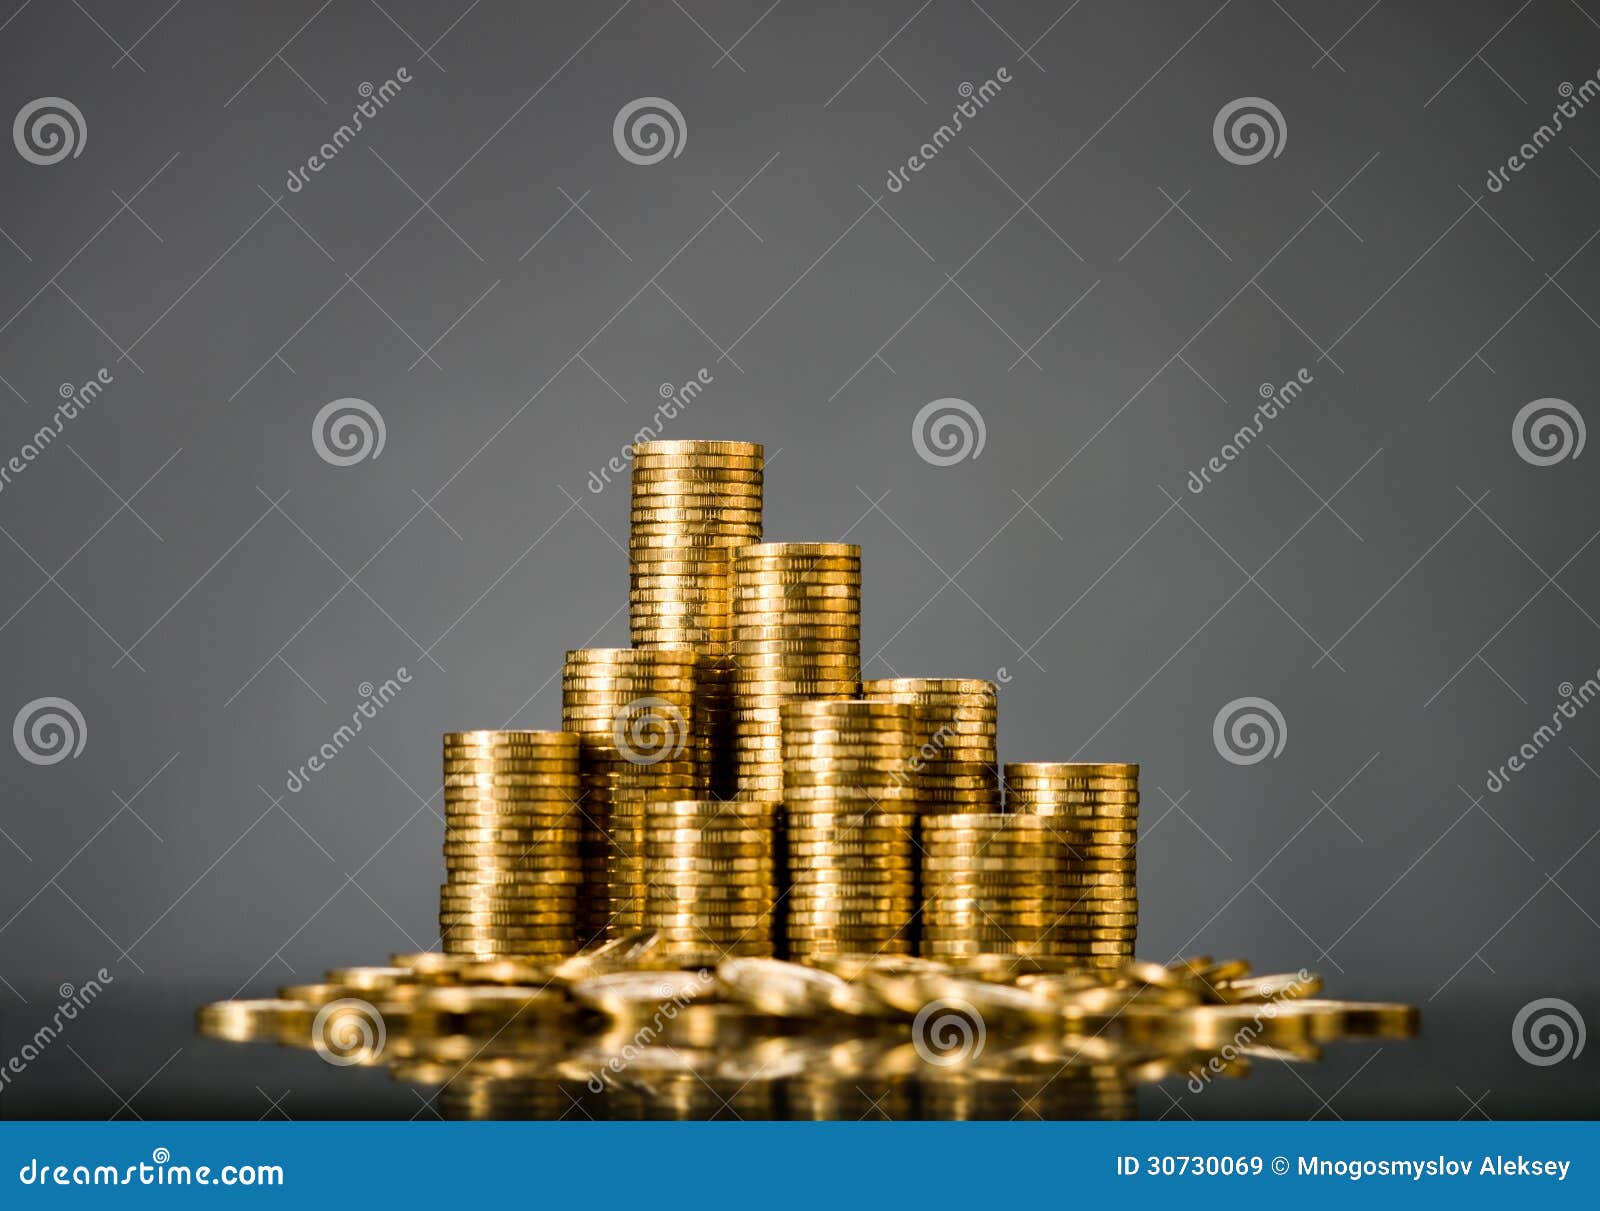 Dollars stock image. Image of many, money, heap, income ...